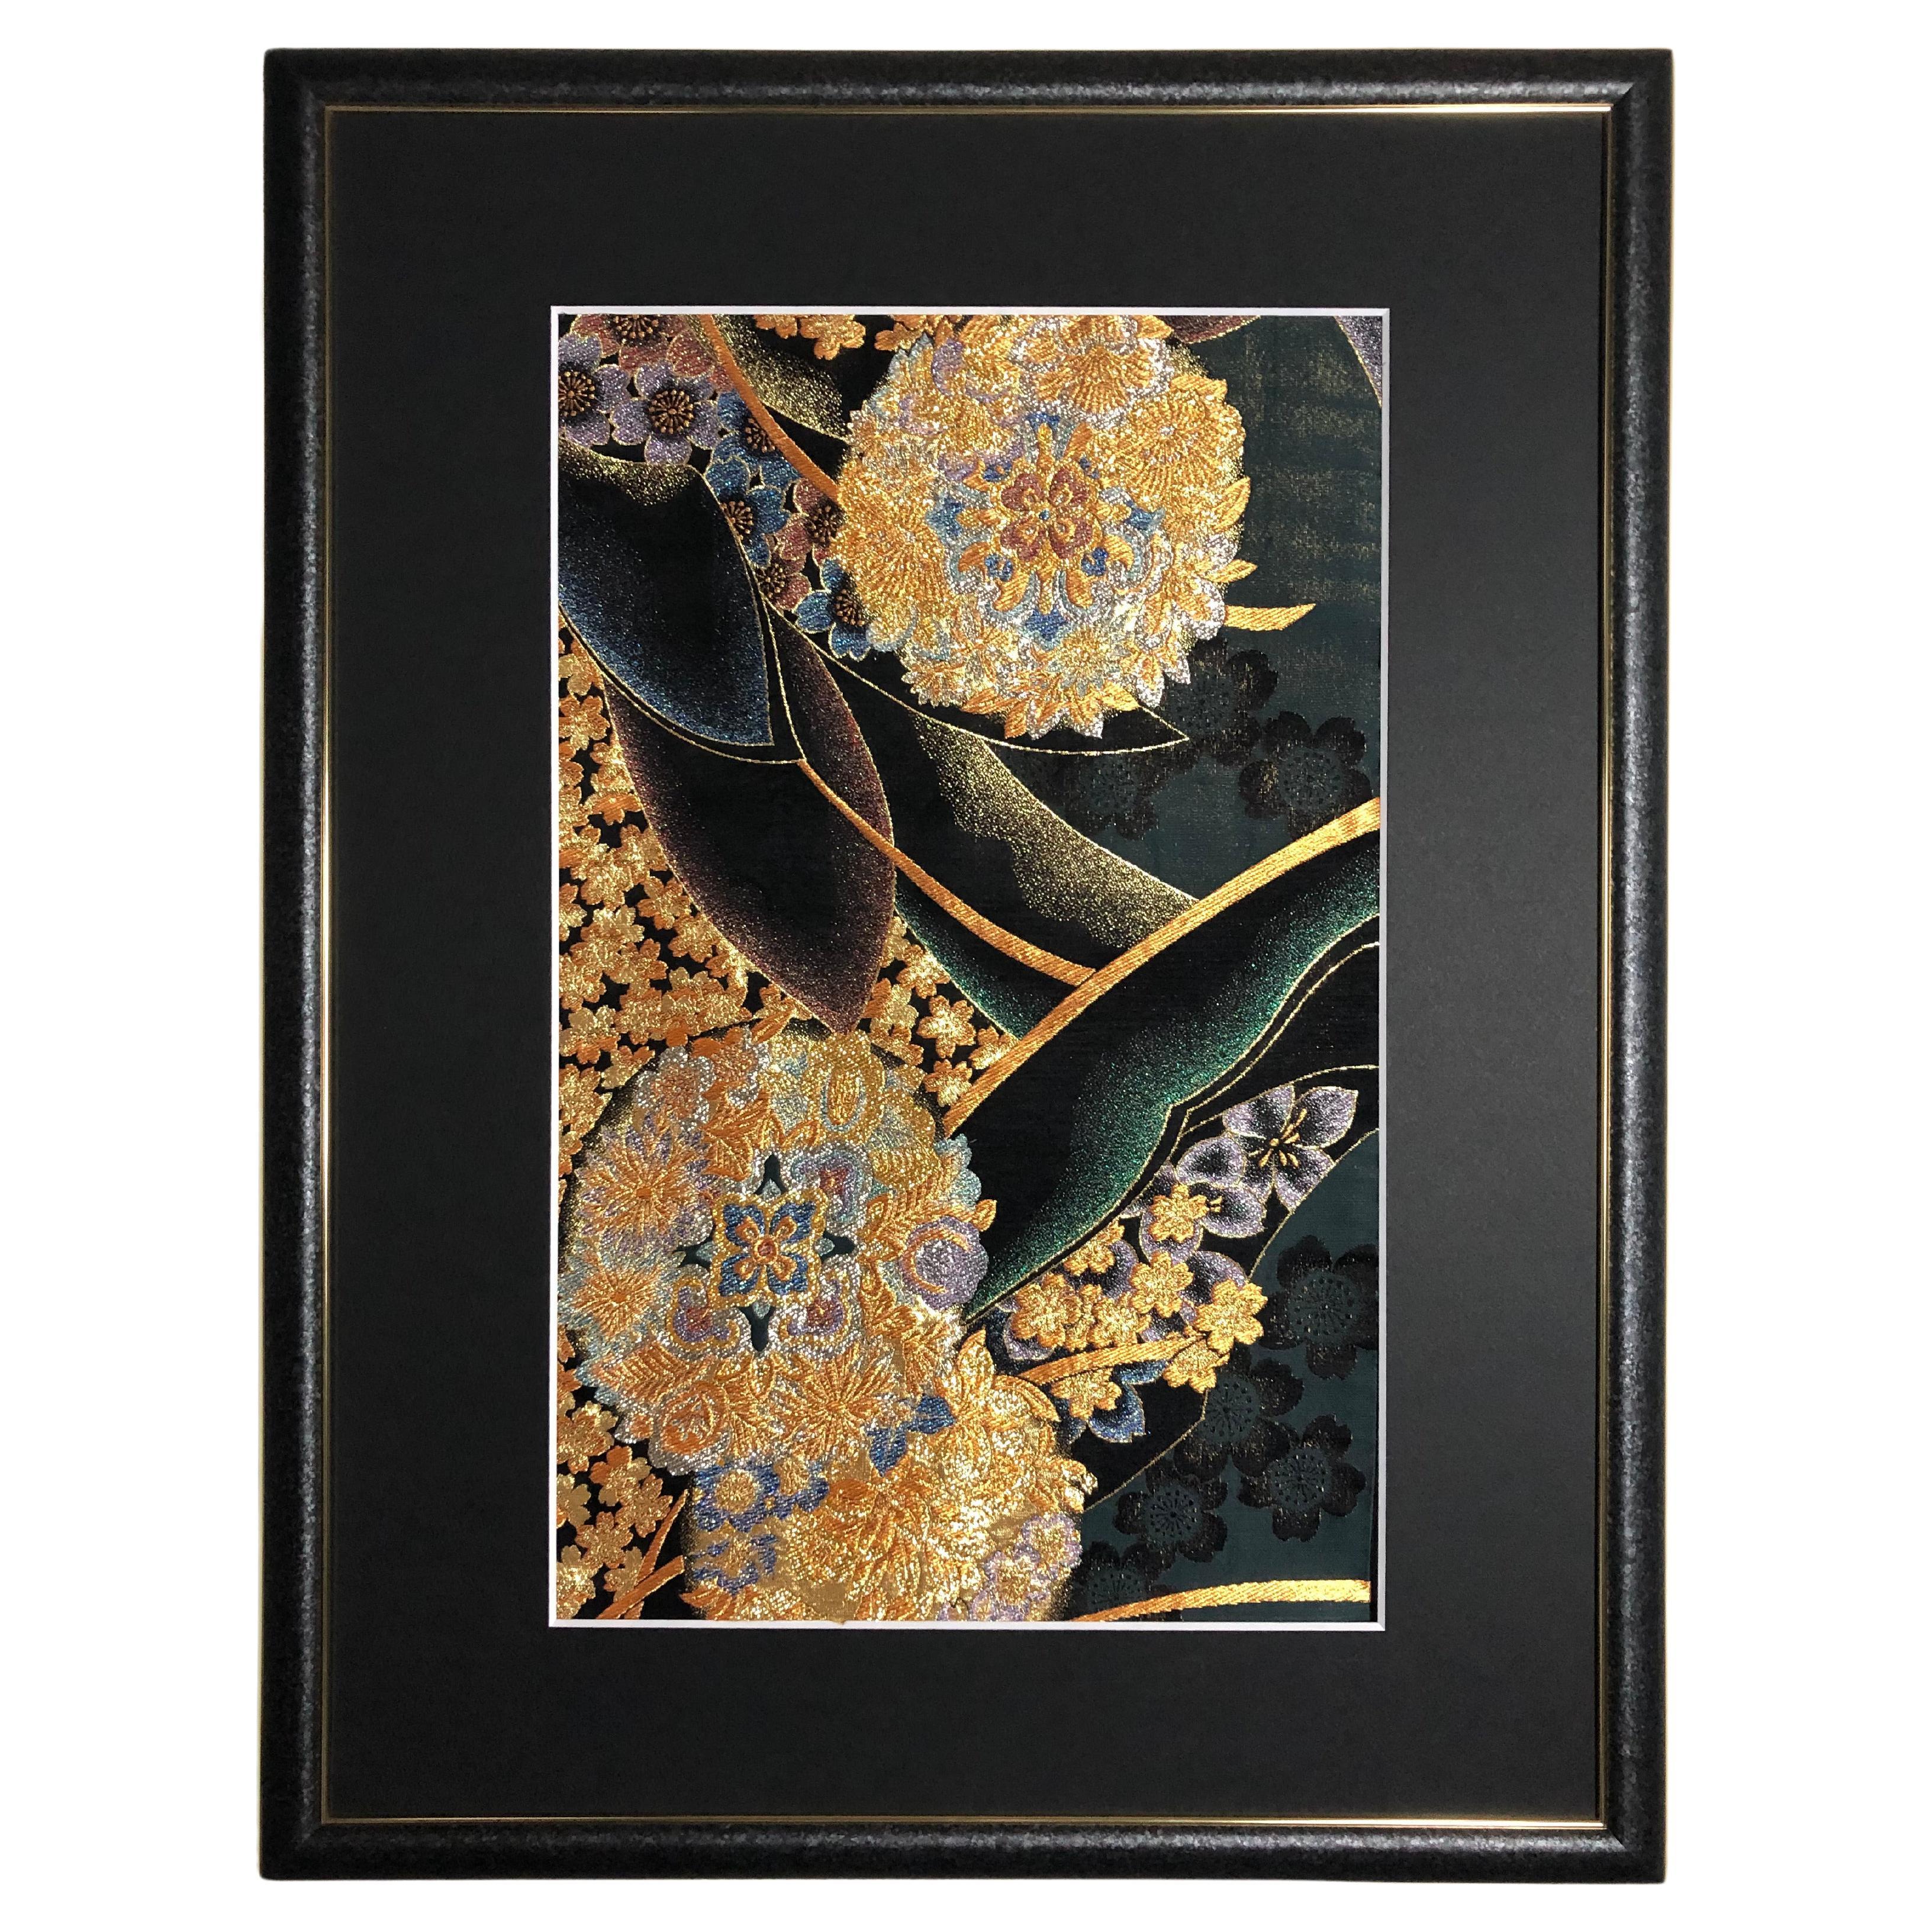 Framed Kimono Art "Bouquet of Love" by Kimono-Couture, Japanese Textile Art For Sale